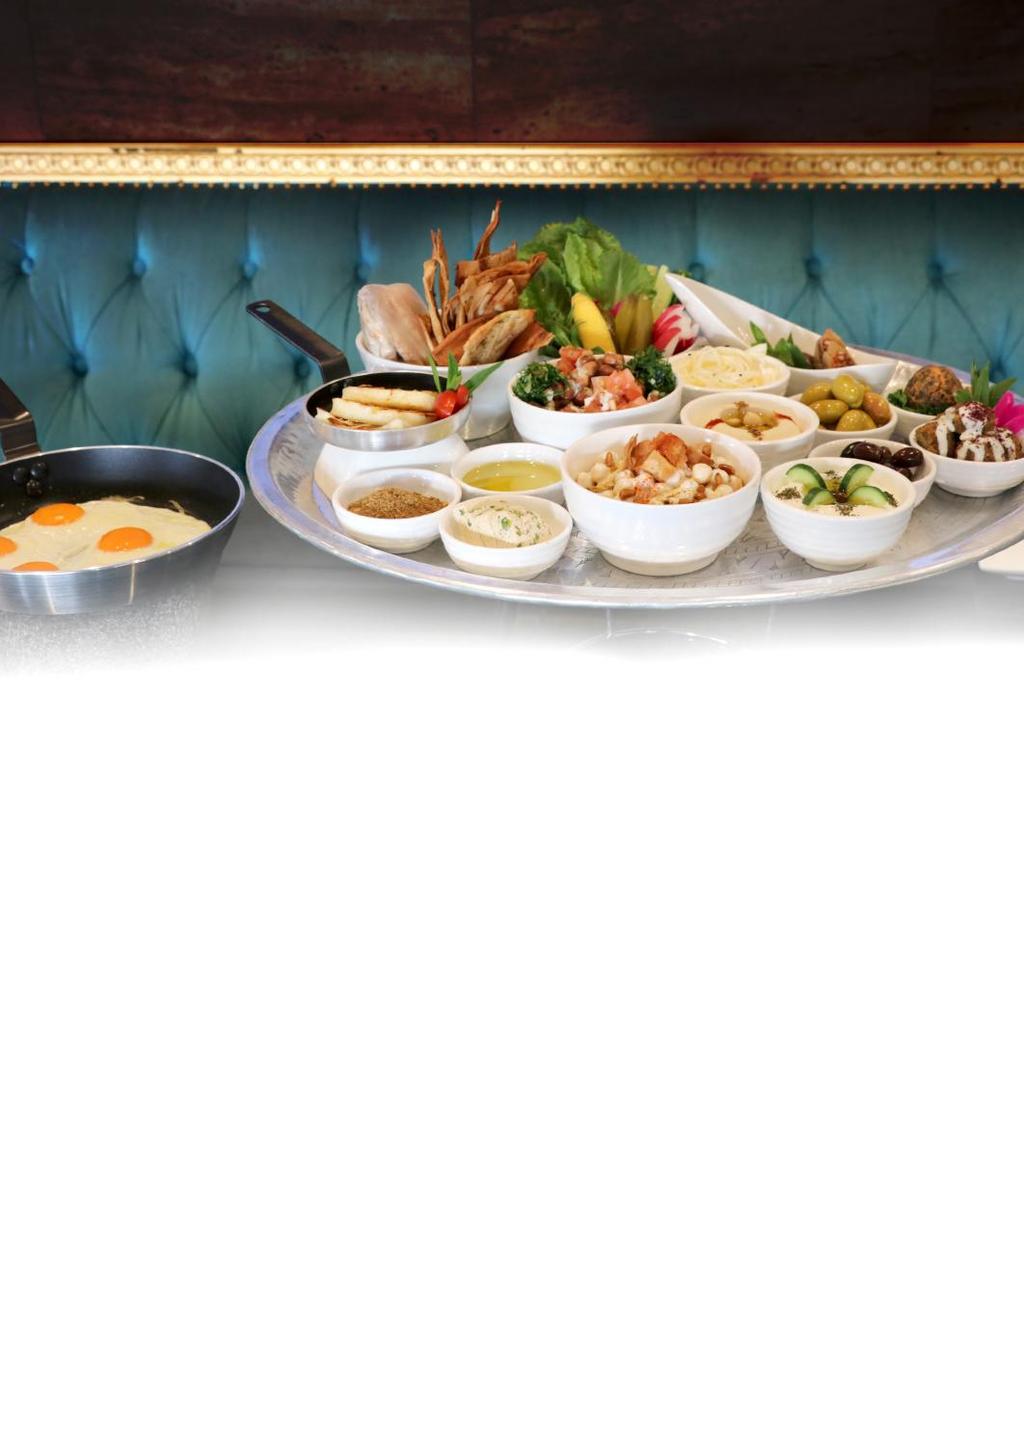 Breakfast Serving from 8:30am to 11:30am everyday ARABIC BREAKFAST BANQUET ARABIC BREAKFAST PLATTER $31.